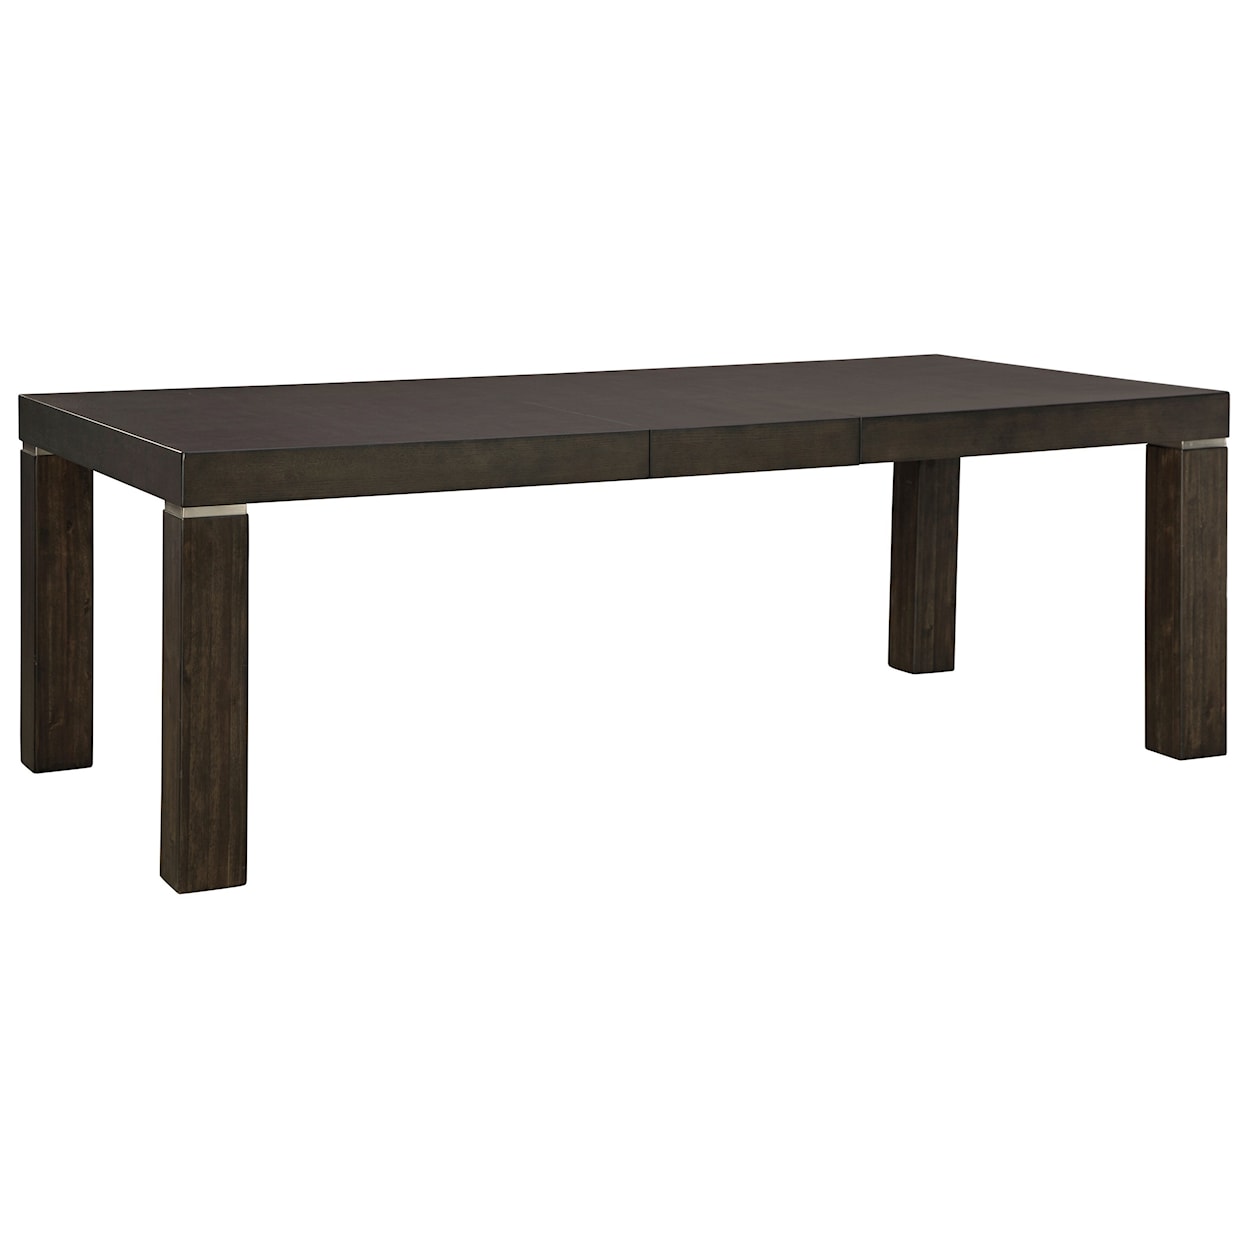 Michael Alan Select Hyndell Rectangular Dining Room Extension Table